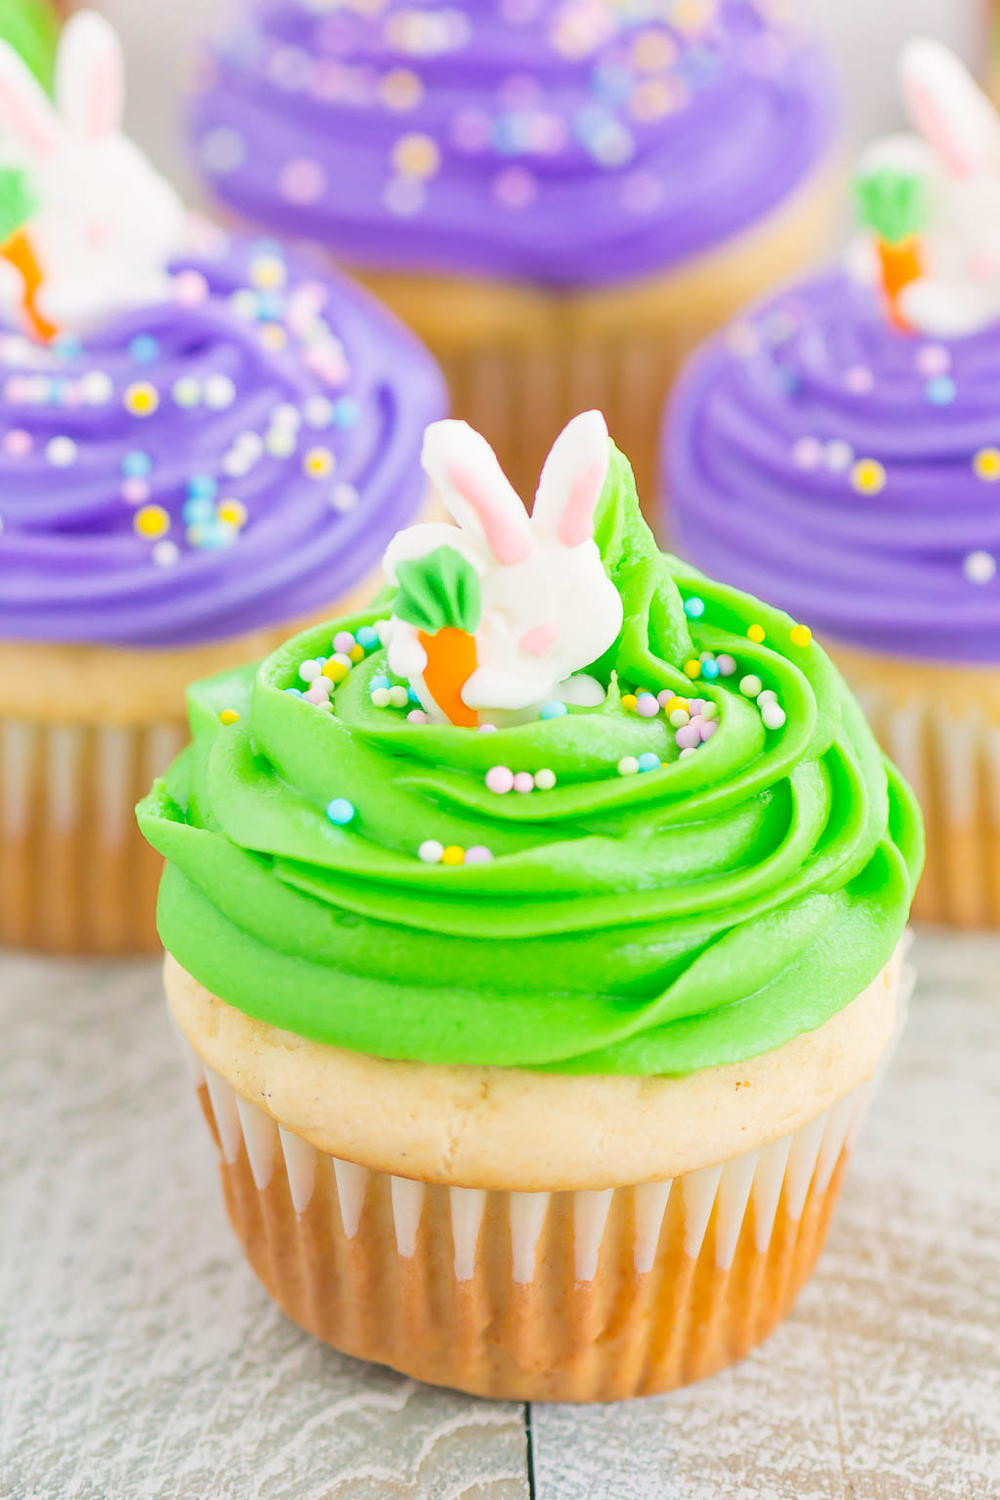 15 Ideas for Easter Cupcakes Images